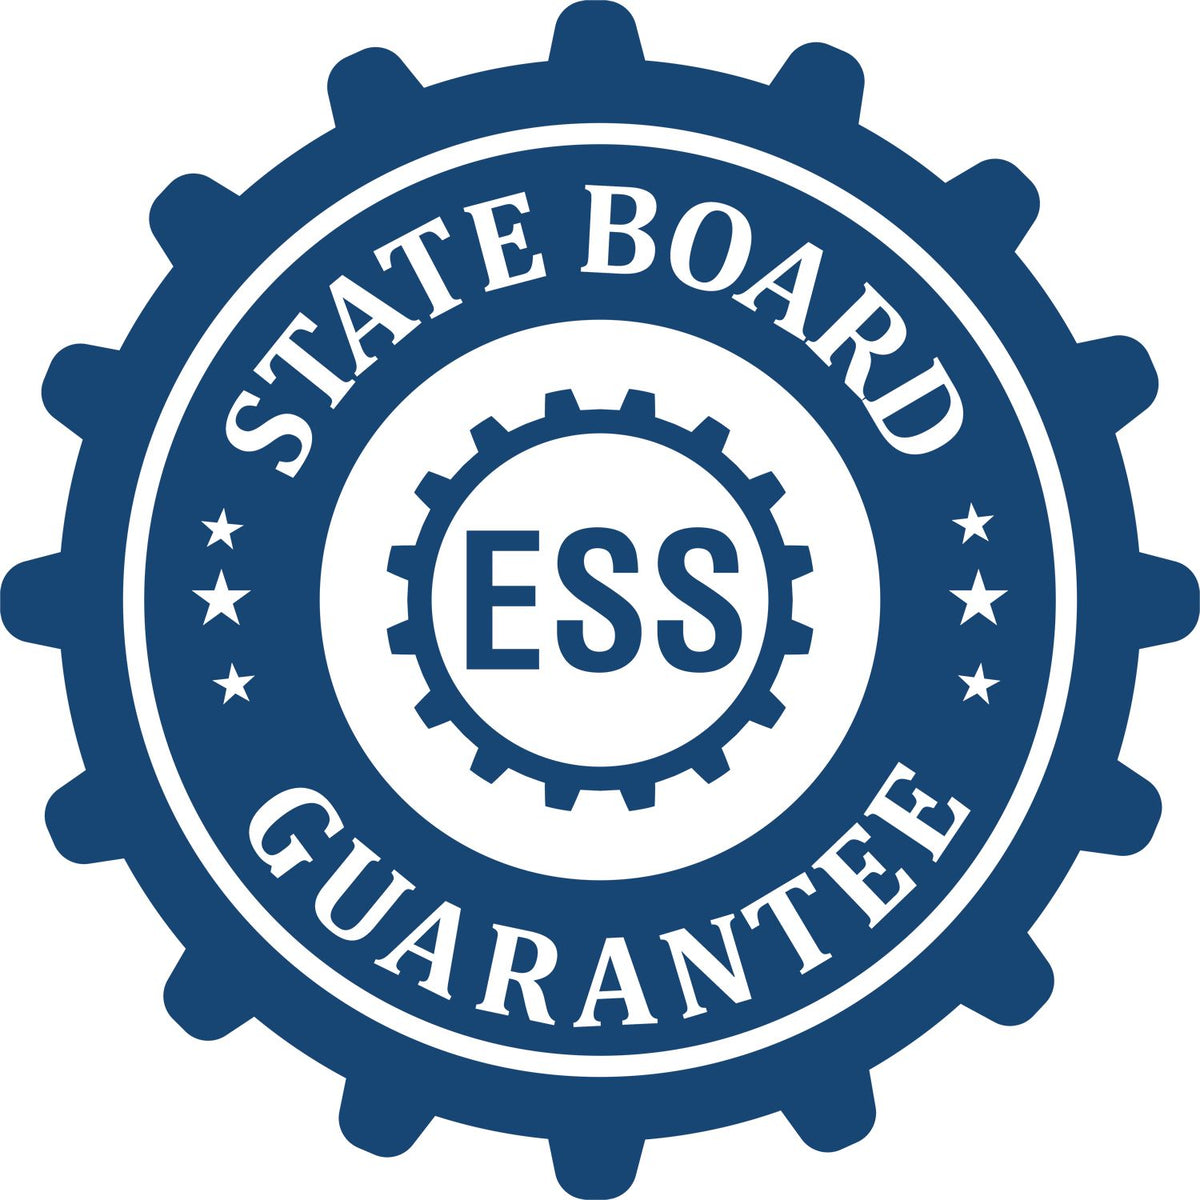 An emblem in a gear shape illustrating a state board guarantee for the Hybrid South Carolina Landscape Architect Seal